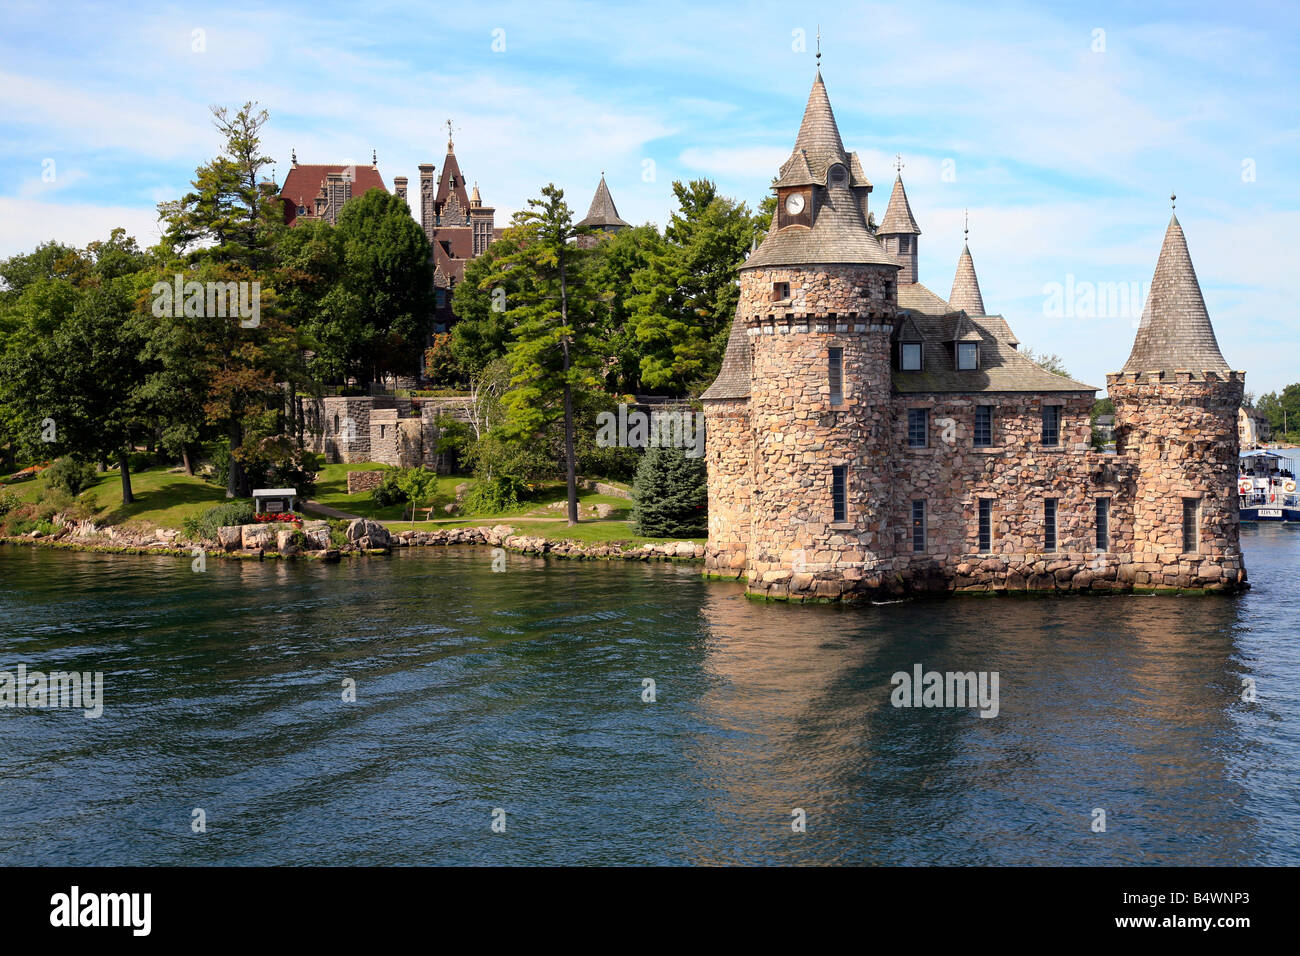 Power House of the Boldt Castle on Heart Island, Alexandria Bay, in the St.Lawrence River on Thousand Island,Ontario,Canada/USA Stock Photo